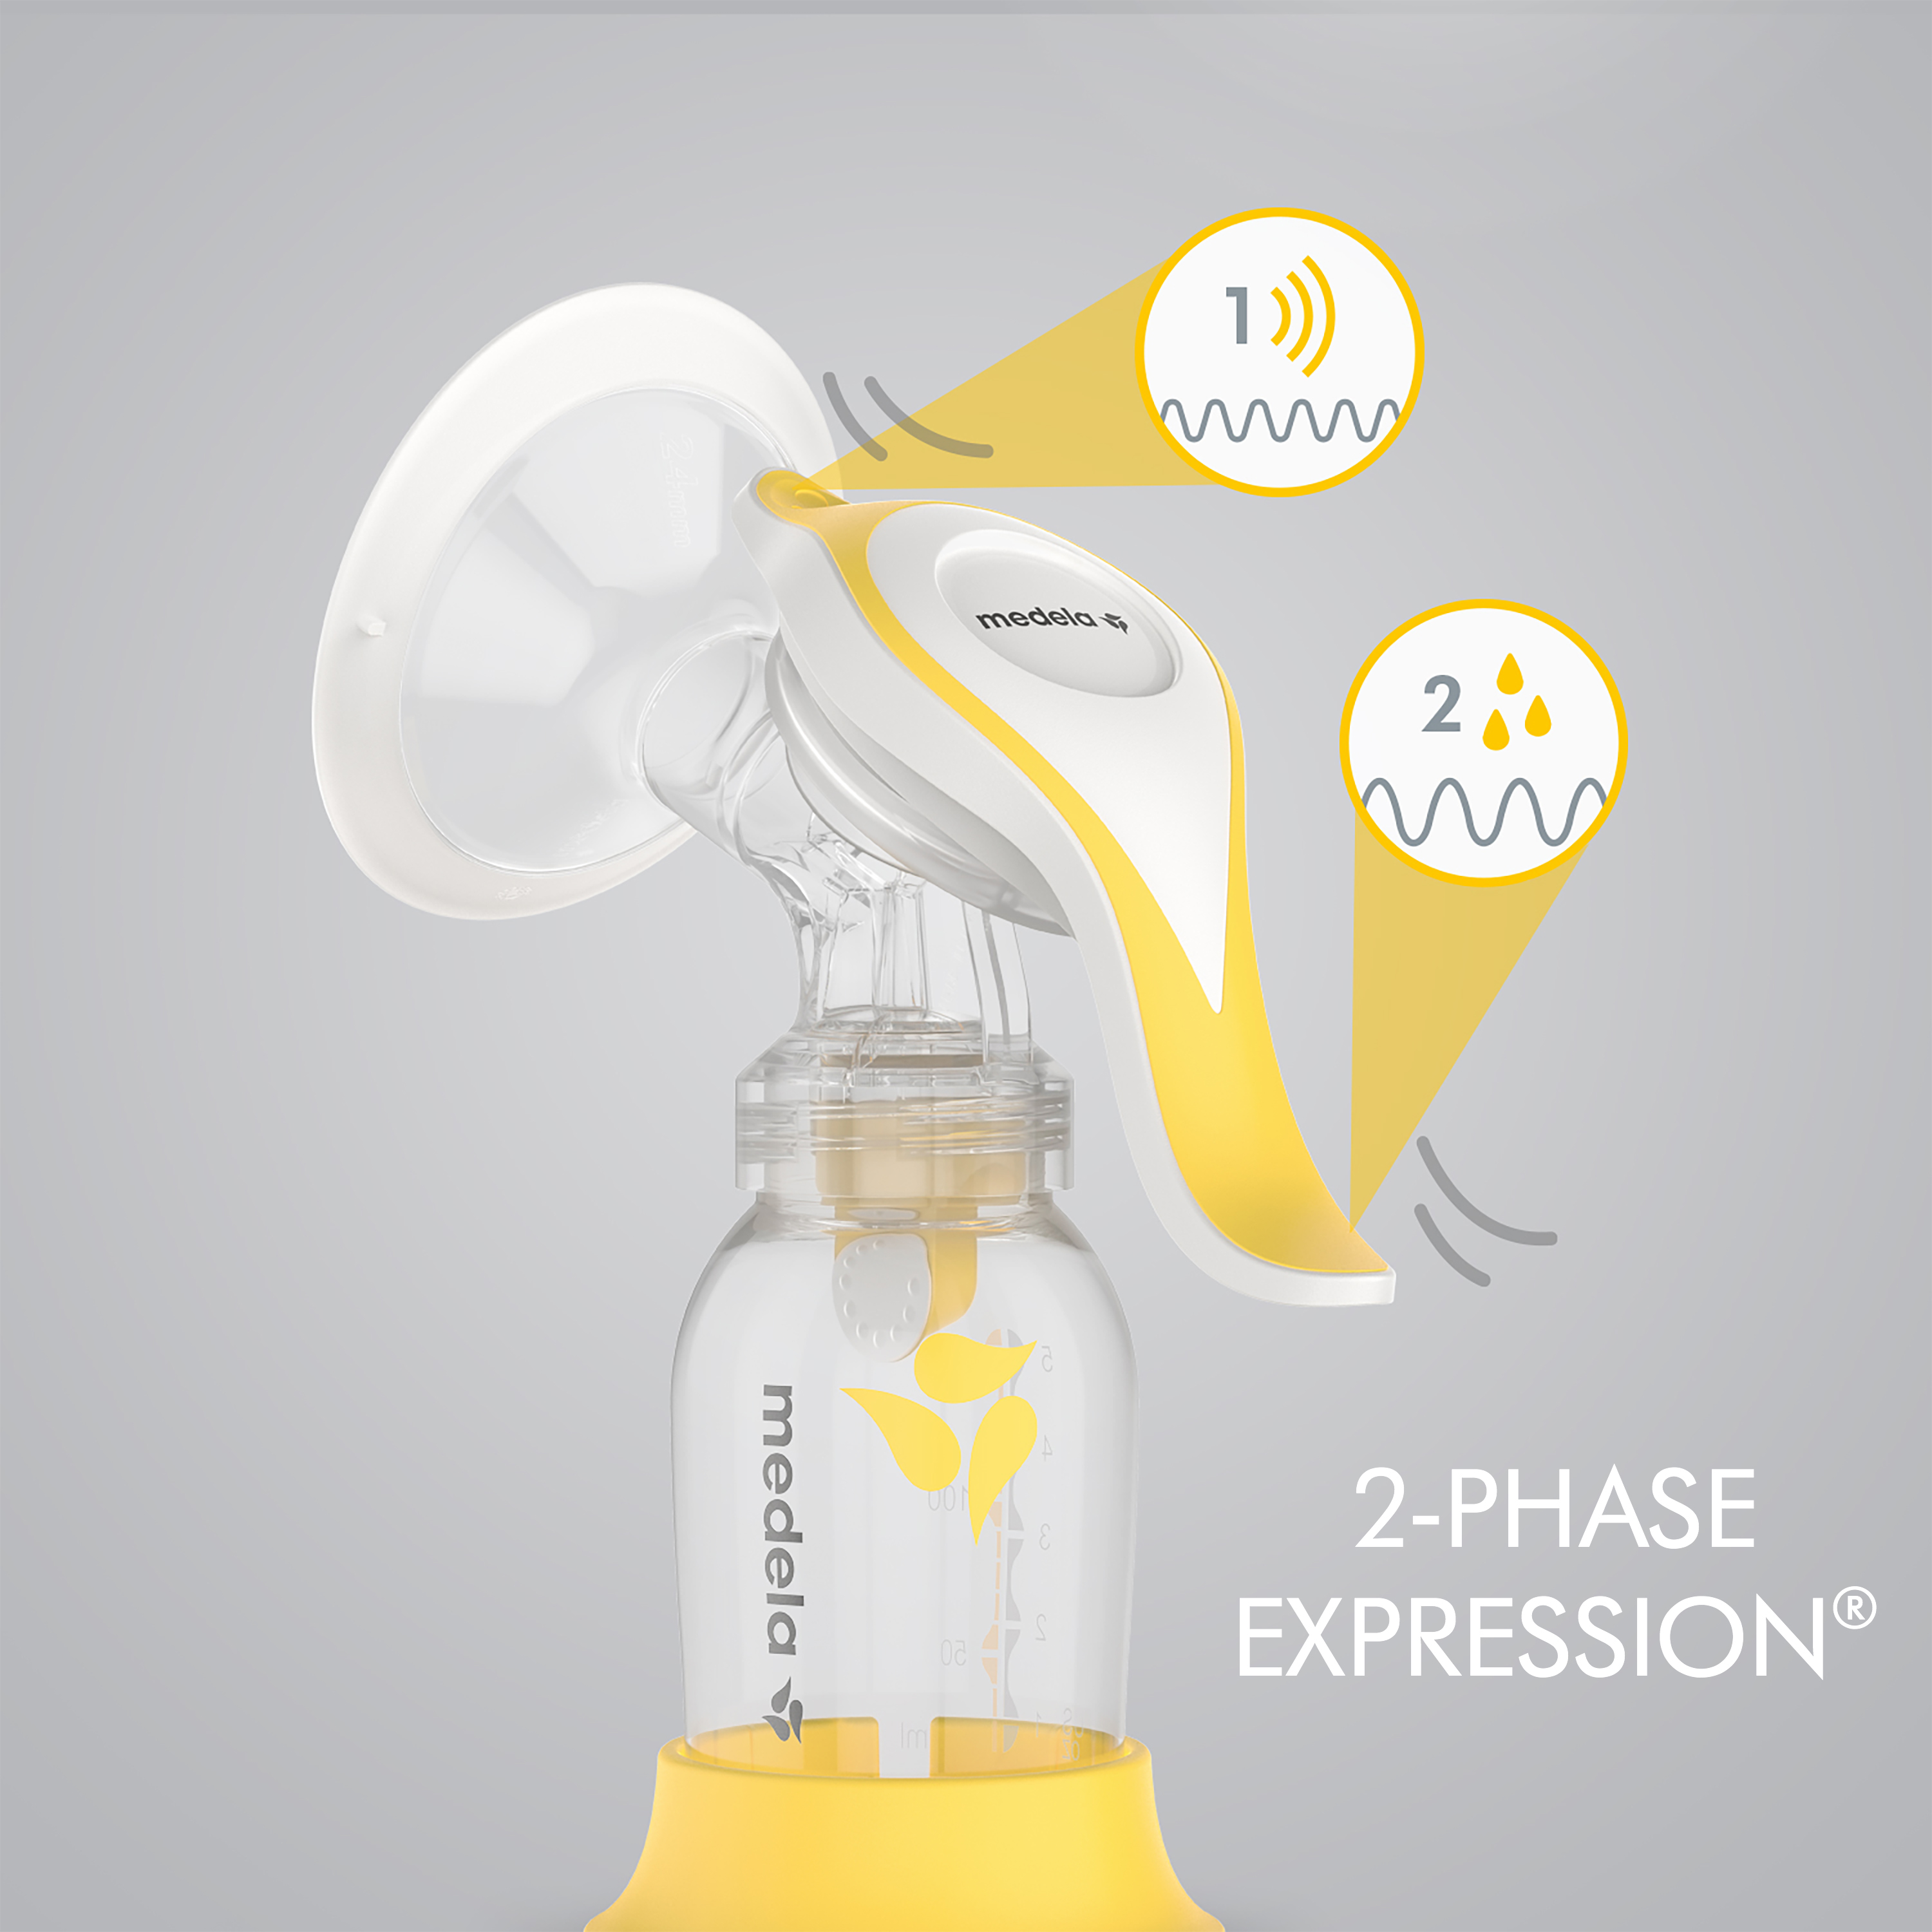 How to use your Medela Harmony hand pump #medela #breastpump